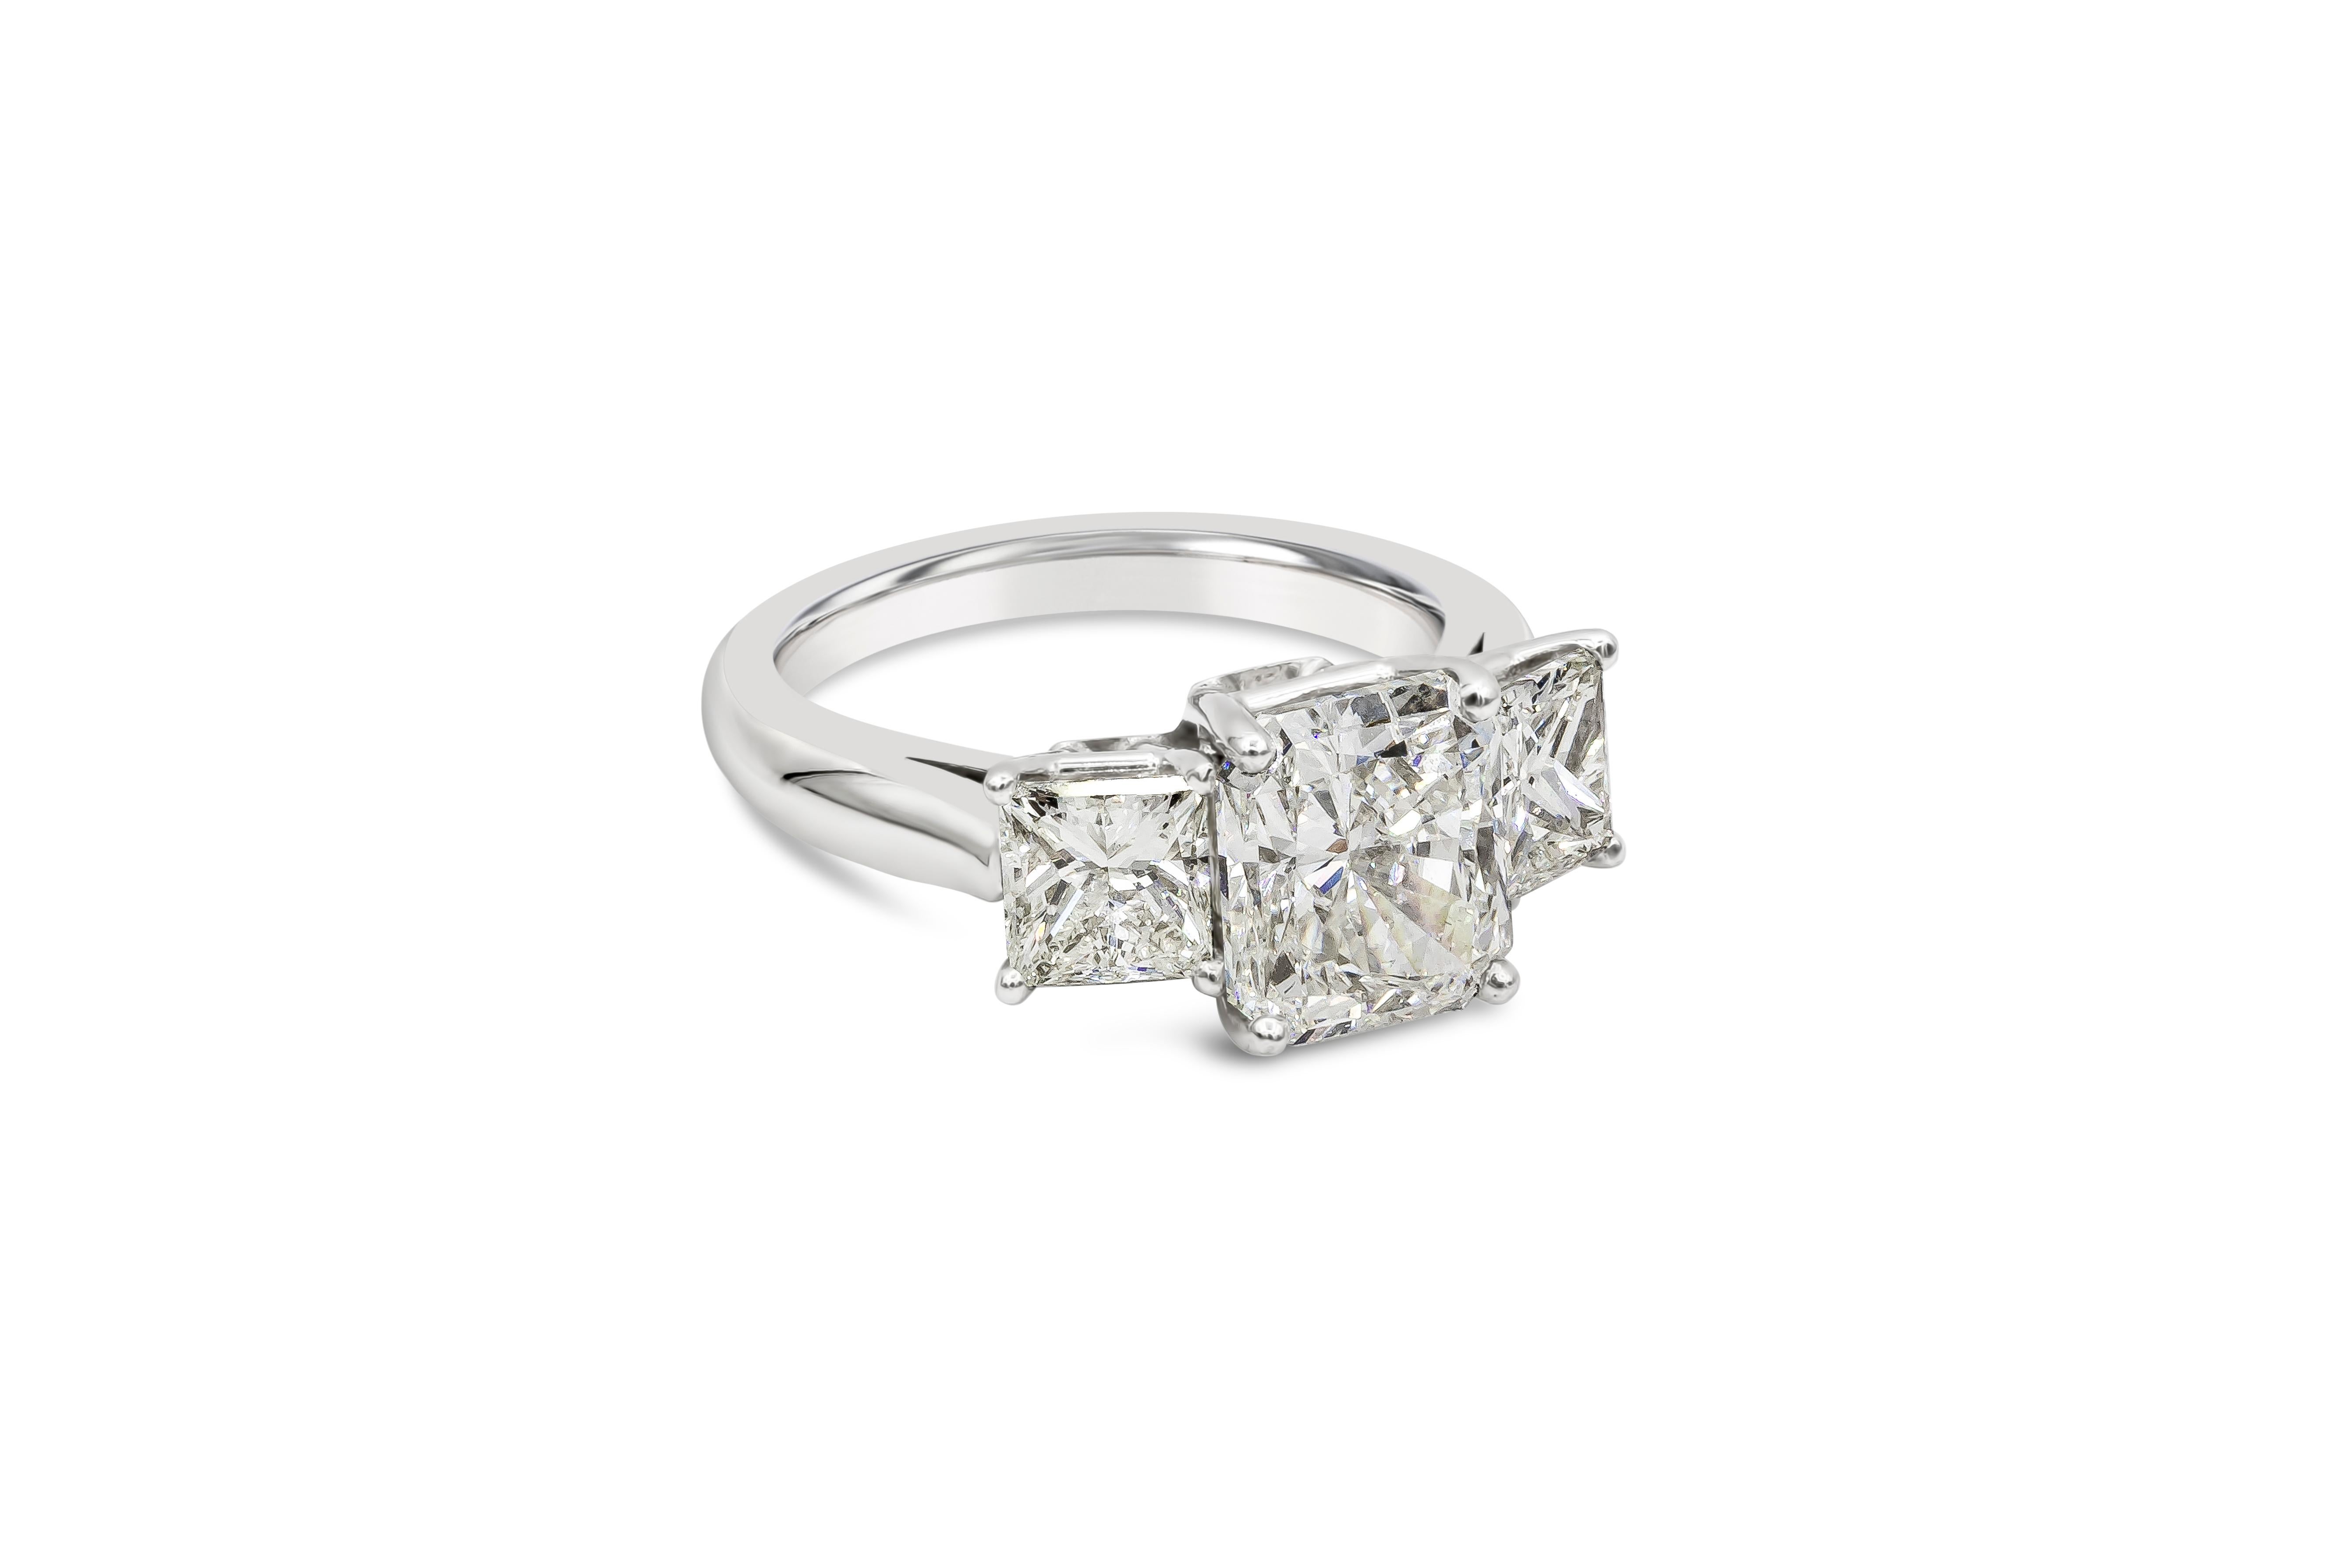 A classic and brilliant engagement ring style showcasing a 3.03 carat radiant cut diamond certified by GIA as I color, VS1 clarity. Flanking the center are princess cut diamonds weighing 1.60 carats total. Set in a polished platinum mounting. Size 6